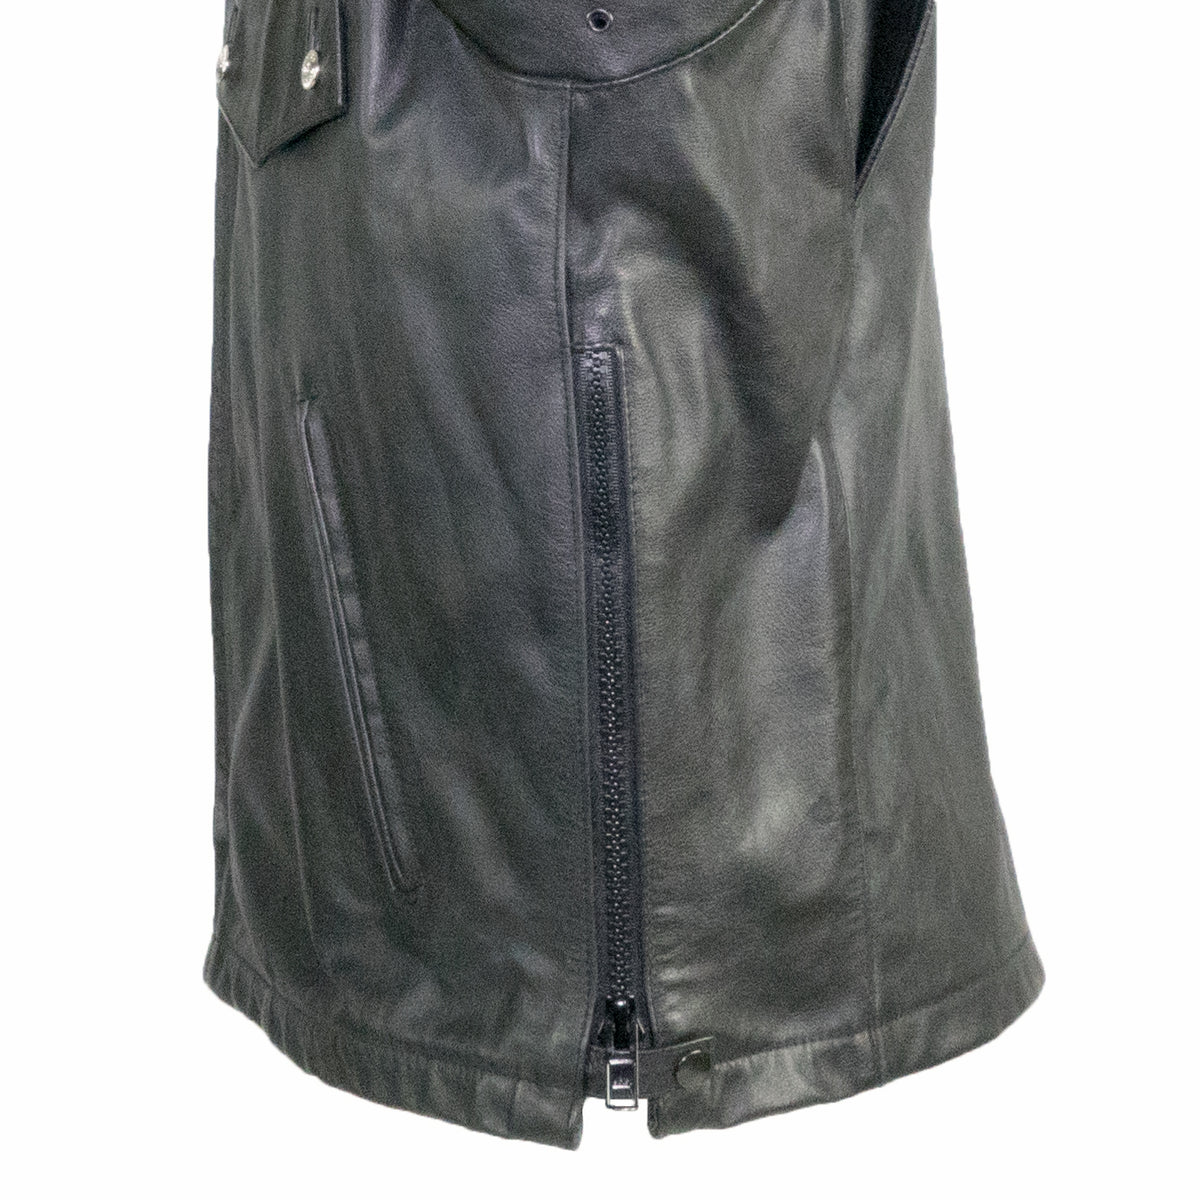 Boston Cowhide Leather Mid Length Police Jacket – Taylor's Leatherwear, Inc.